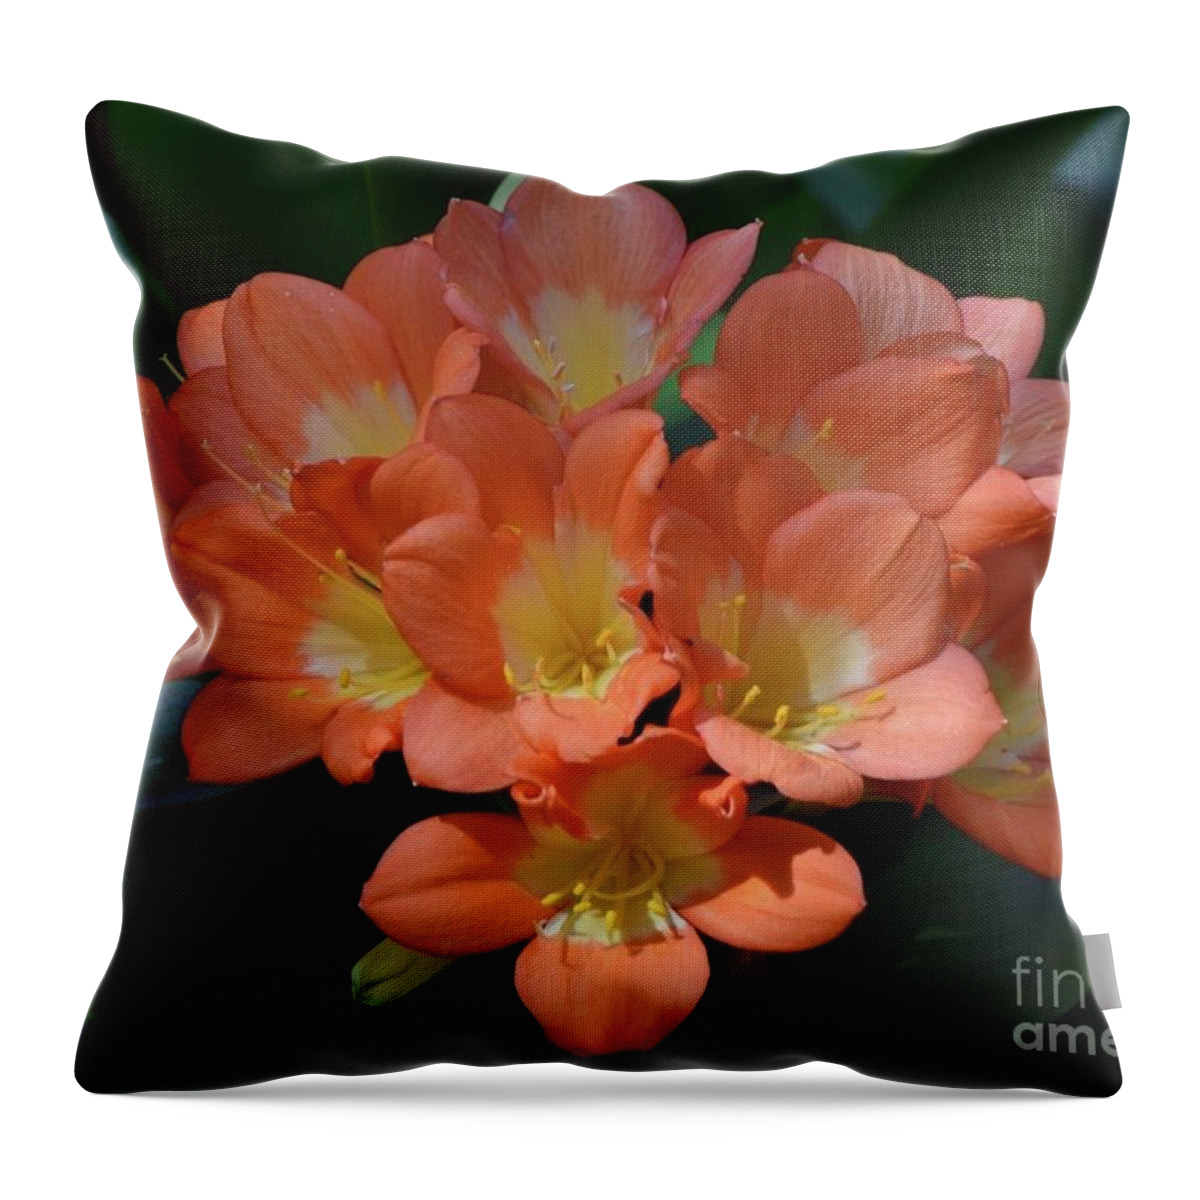 Art Throw Pillow featuring the photograph Clivia Blooms In Warm Orange by Jeannie Rhode